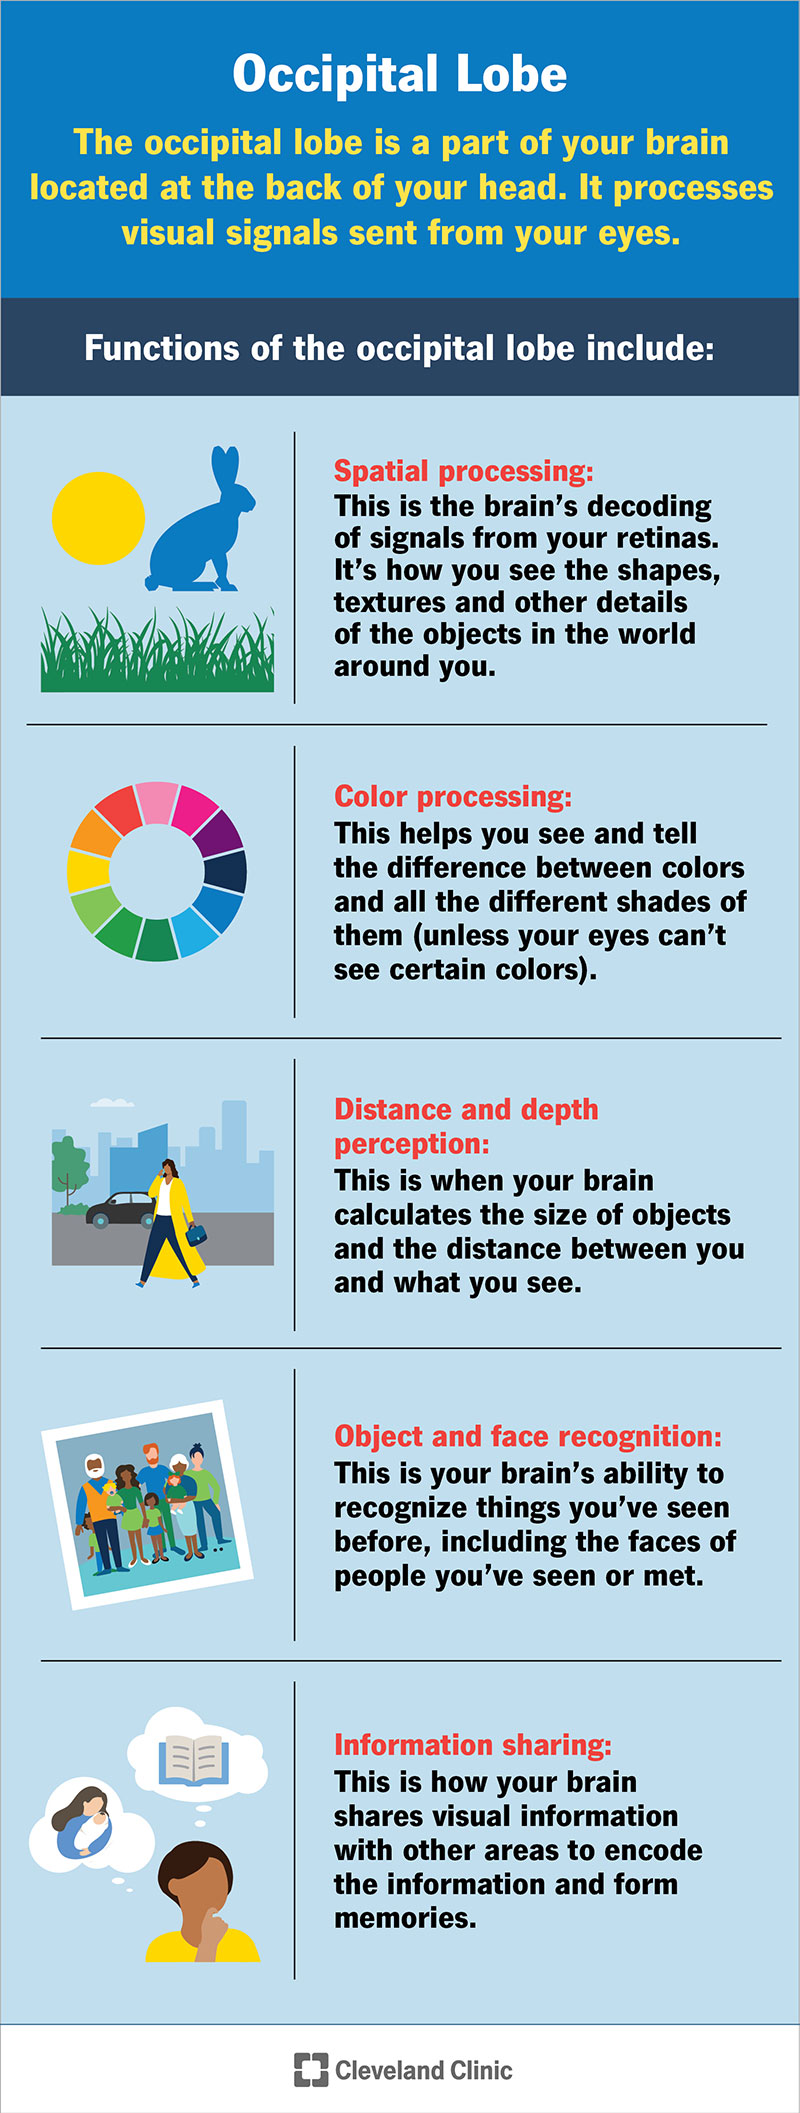 The occipital lobe processes what your eyes see. It translates signals from your eyes into a form your brain can use.